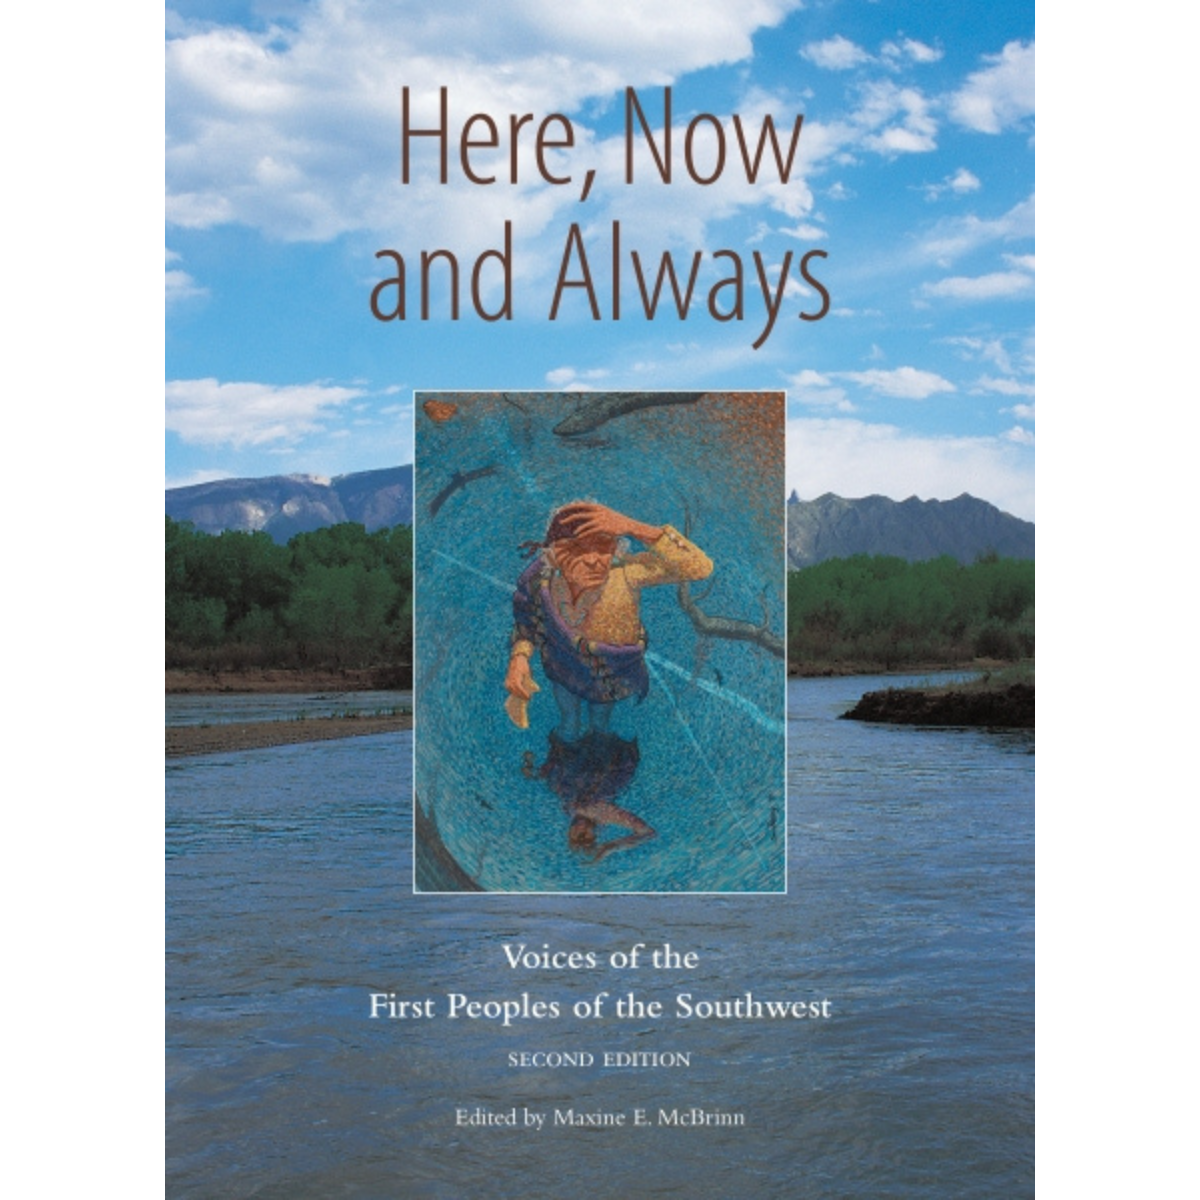 Here, Now and Always: Voices of The First Peoples of The Southwest